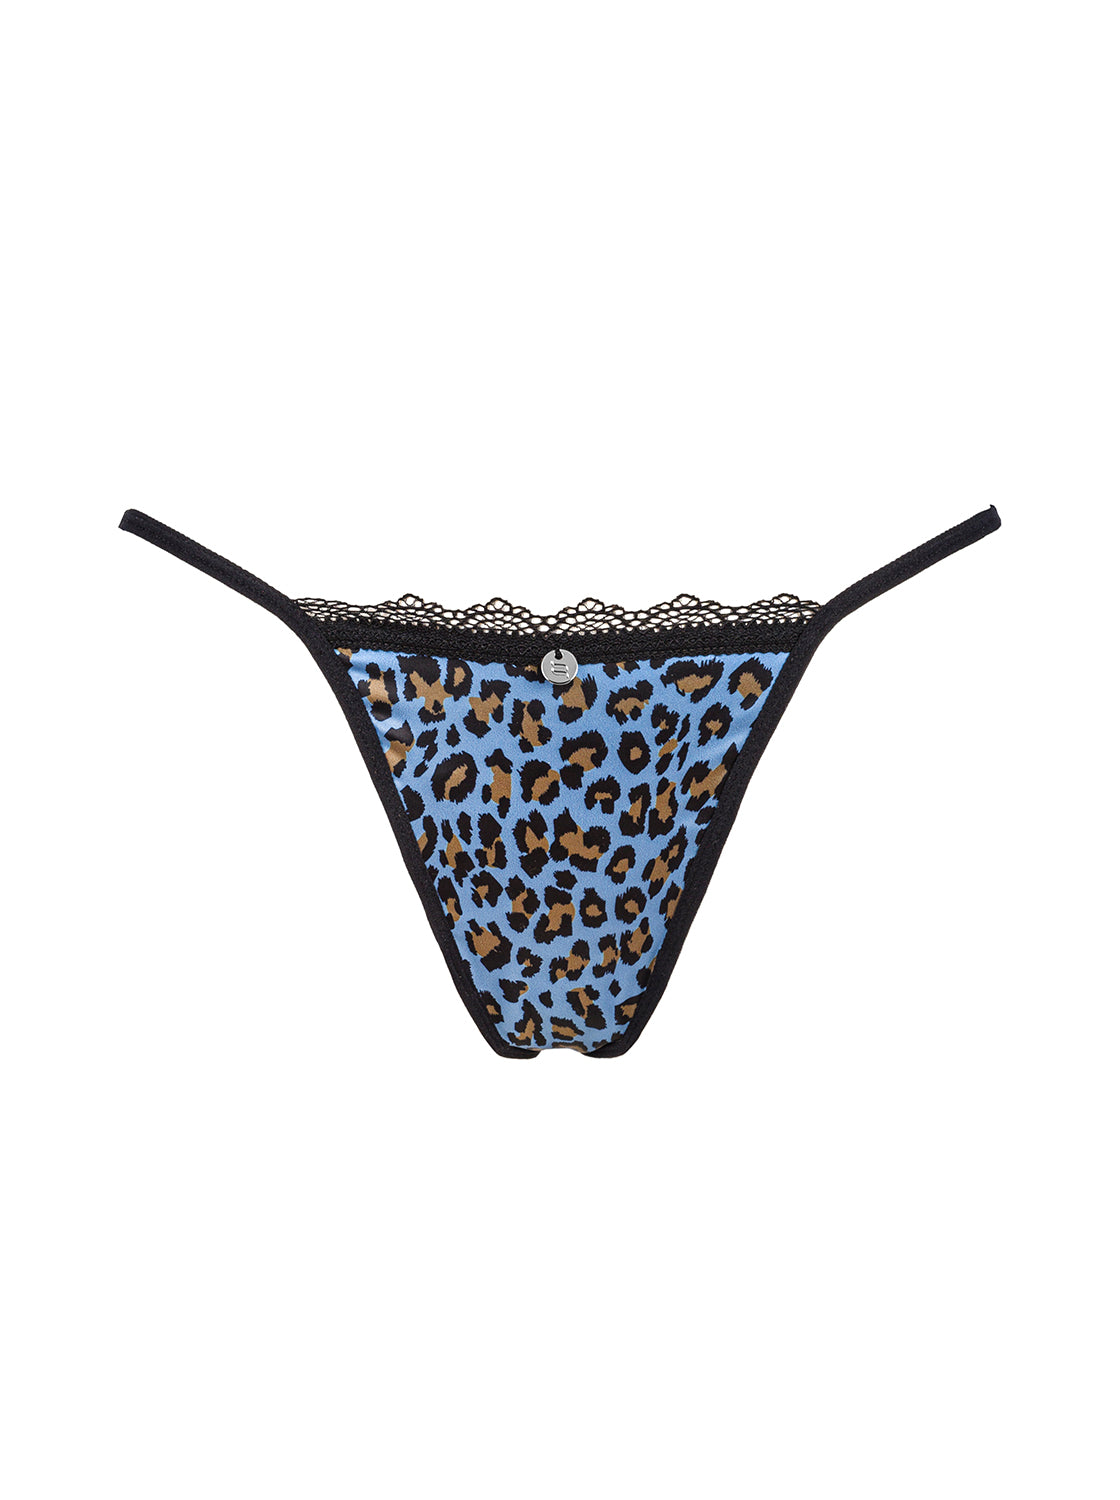 Nadine's thong made of soft and satin material in blue with sexy leopard print and black lace